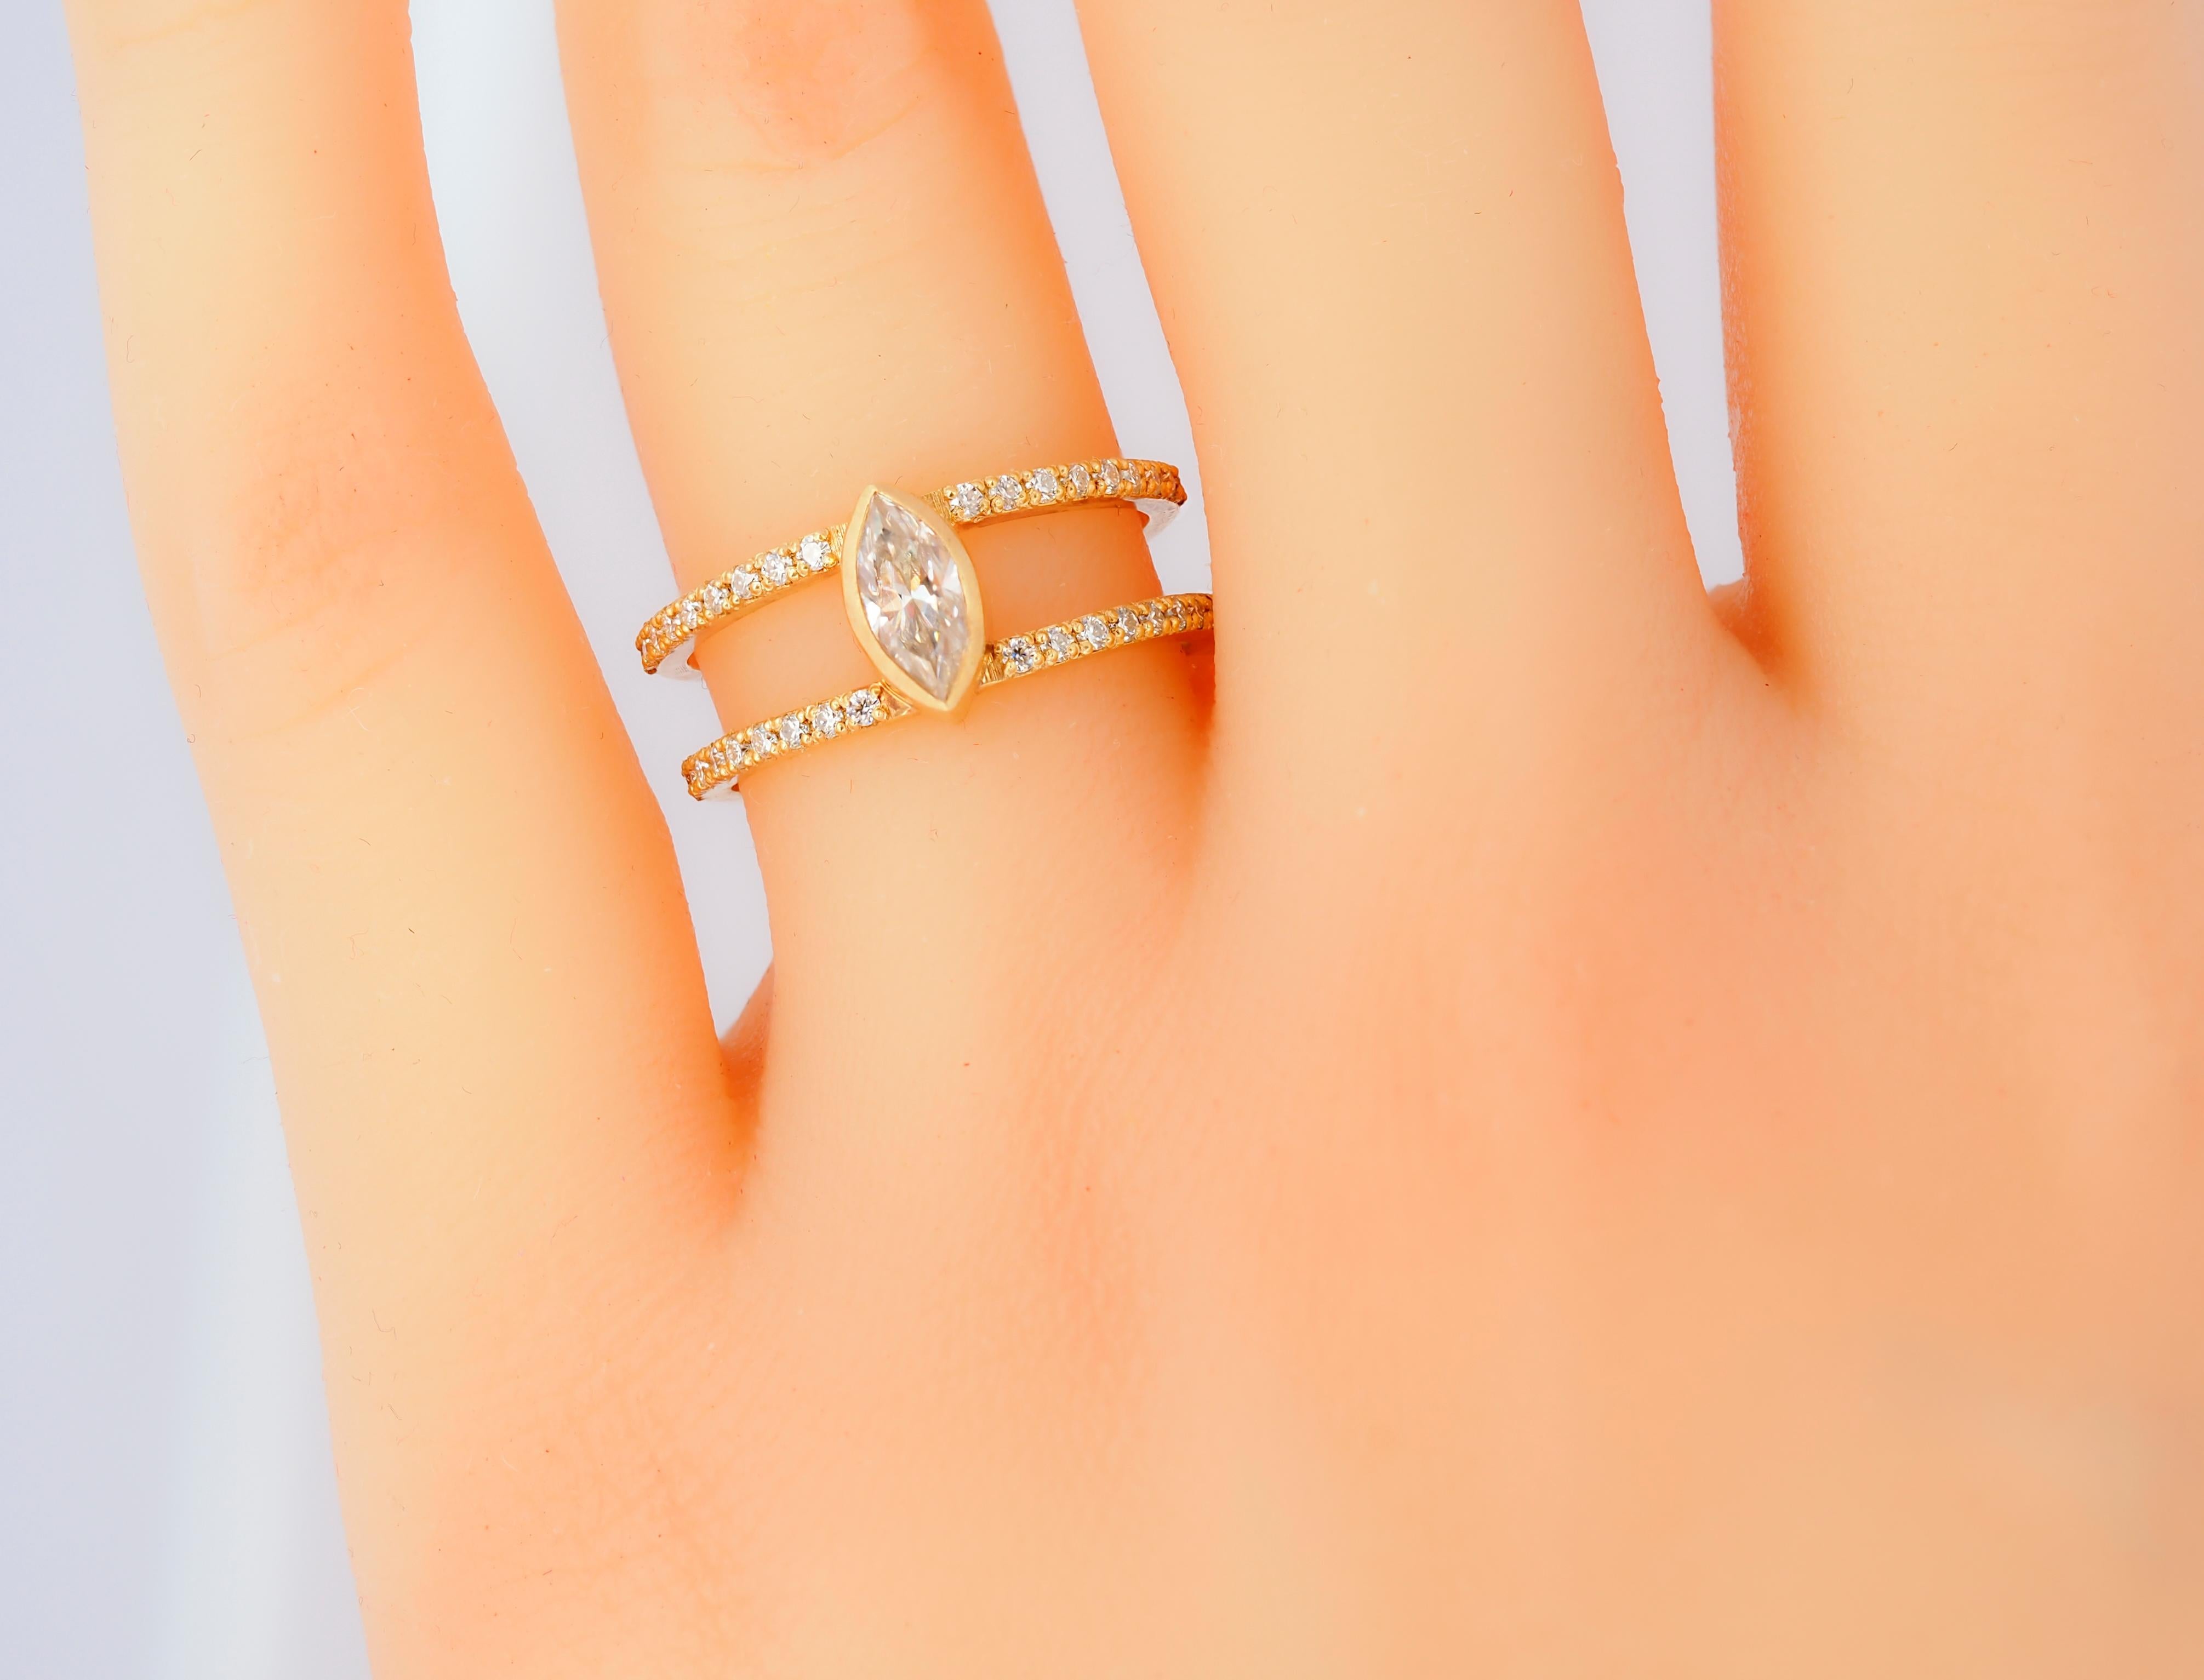 For Sale:  1 ct Marquise moissanite engagement ring in 14k gold.  10